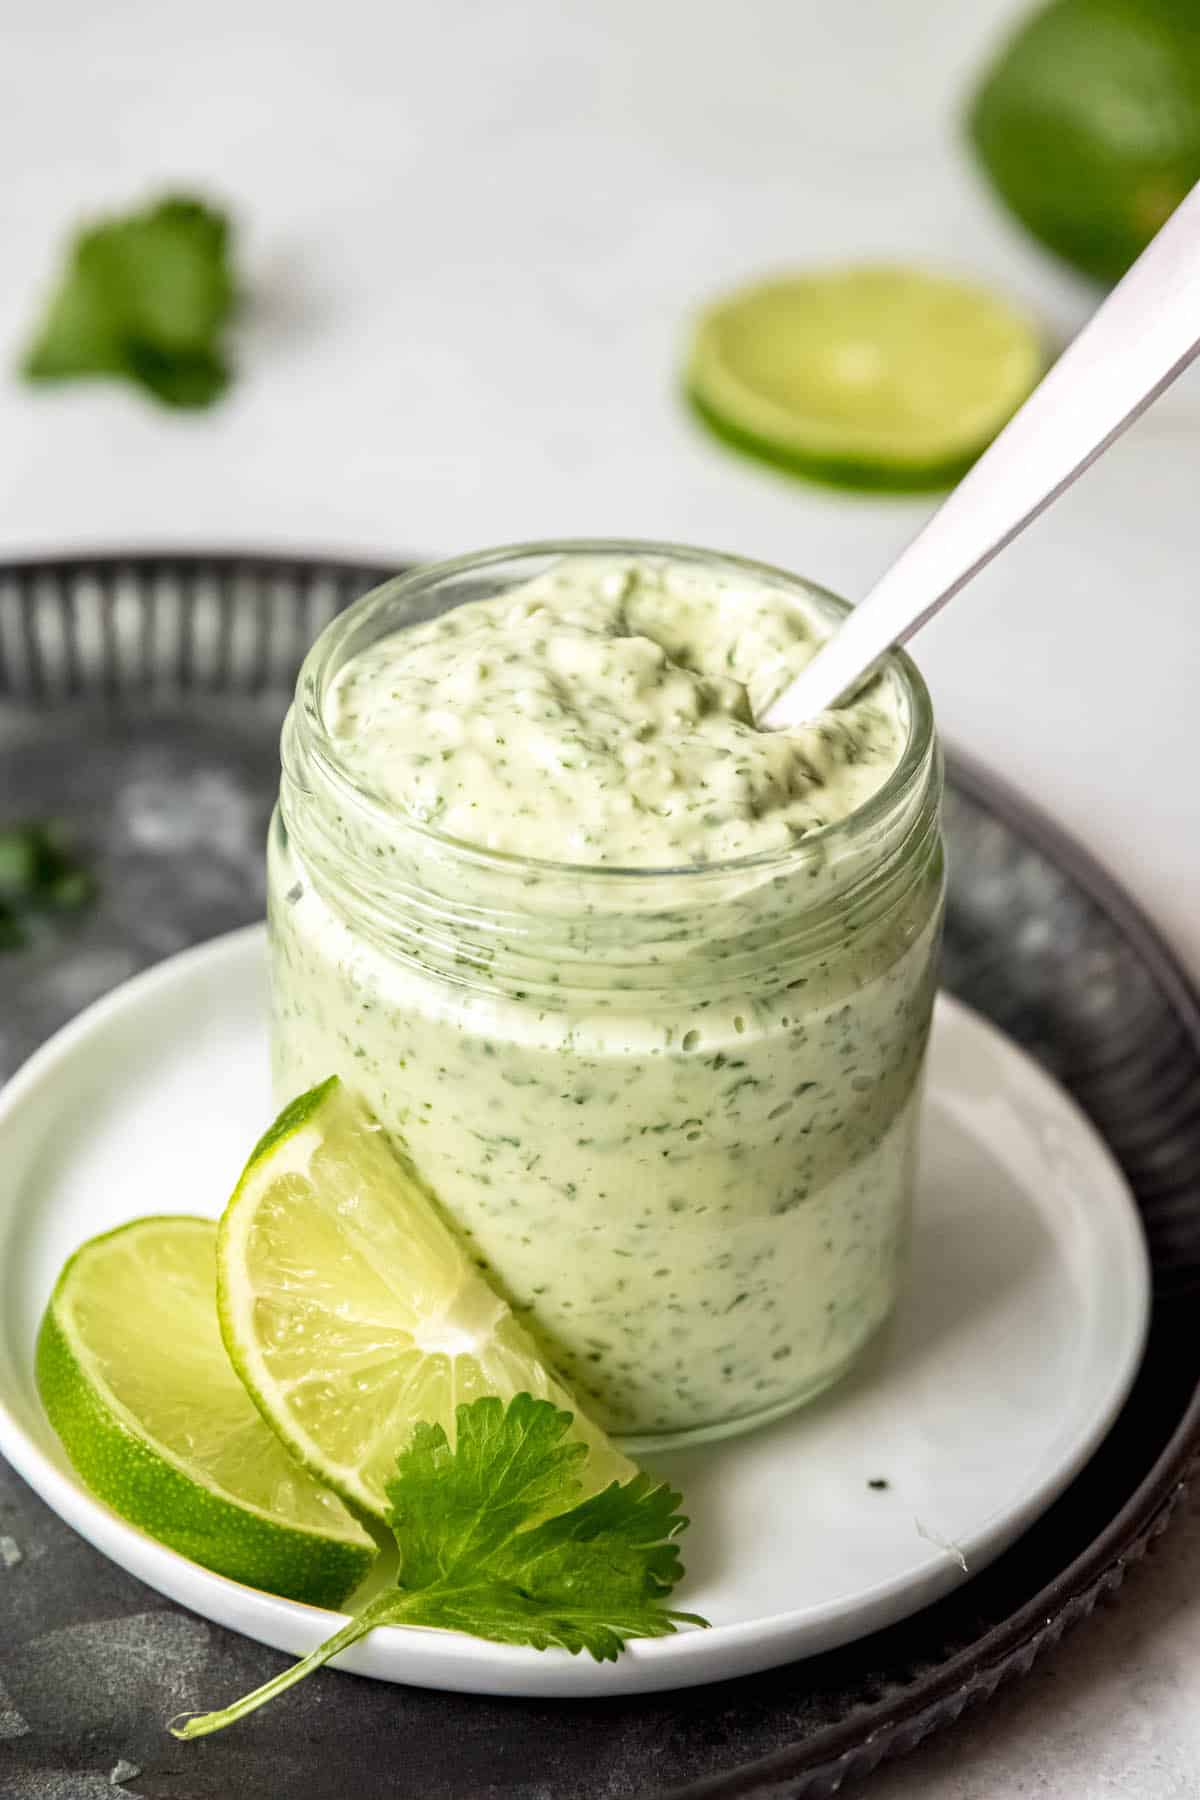 small glass jar filled with chuy's copycate creamy jalapeno cilantro lime garlic sauce with a silver spoon for serving.